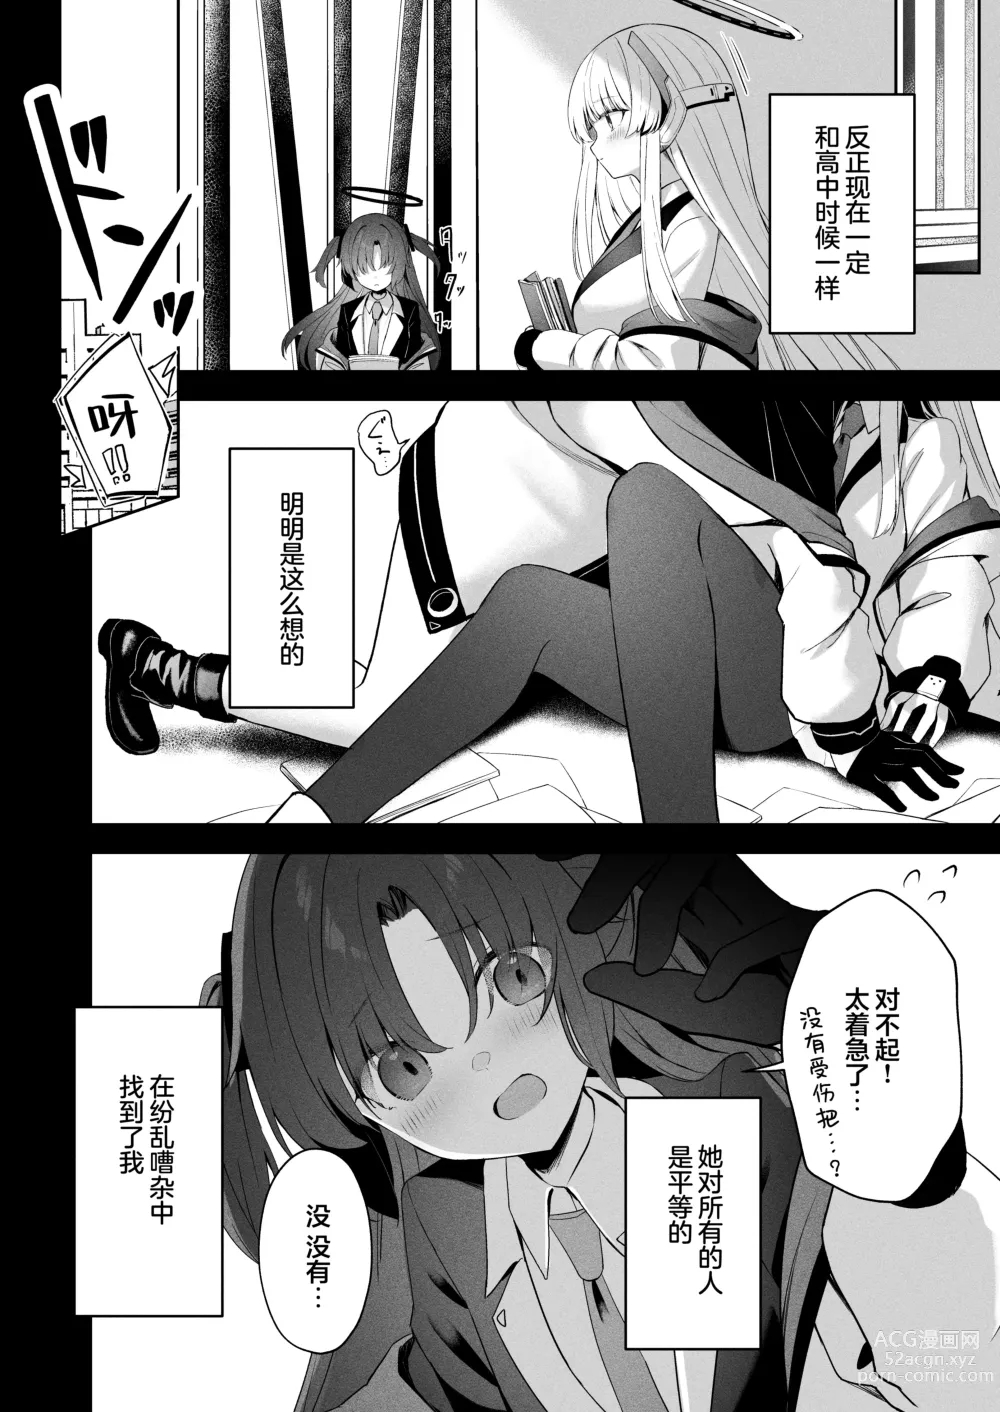 Page 9 of doujinshi Answers